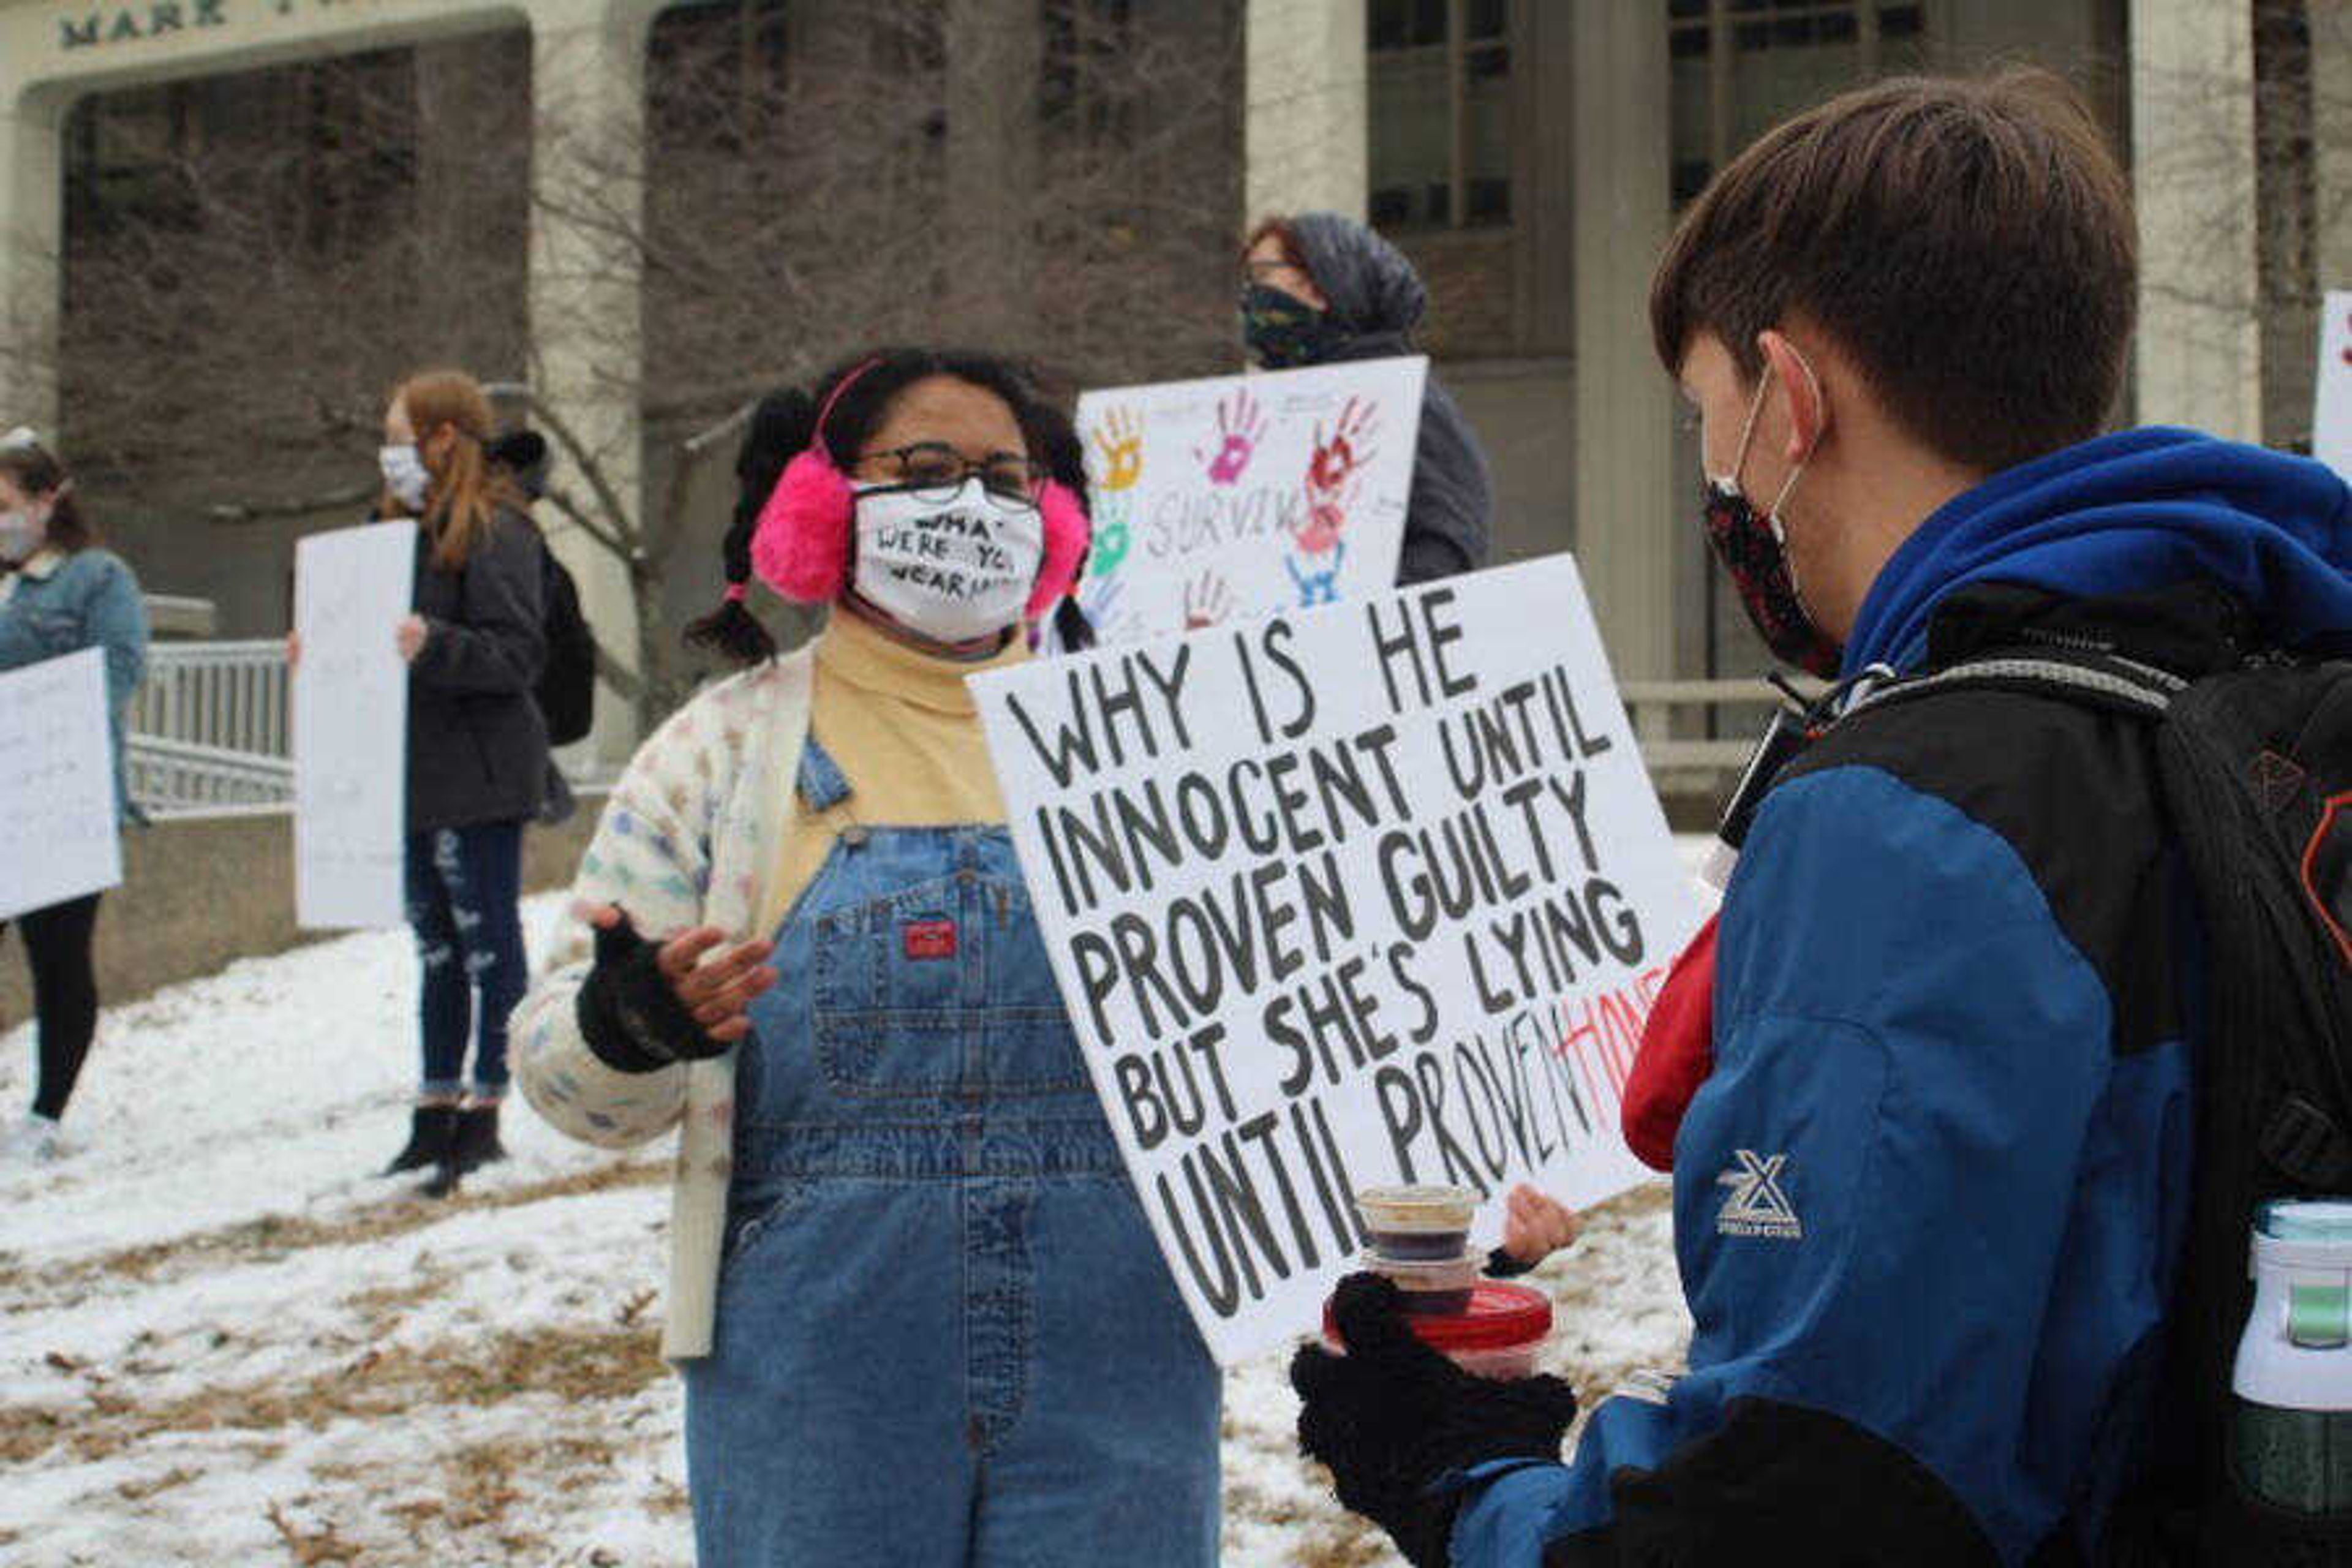 Protest organizer Mahala Pittman discusses the message on her sign with a passerby during a protest Monday against the university’s sexual assault policies. Participants called for Vargas to take actions outlined in a Dec. 16 press release.